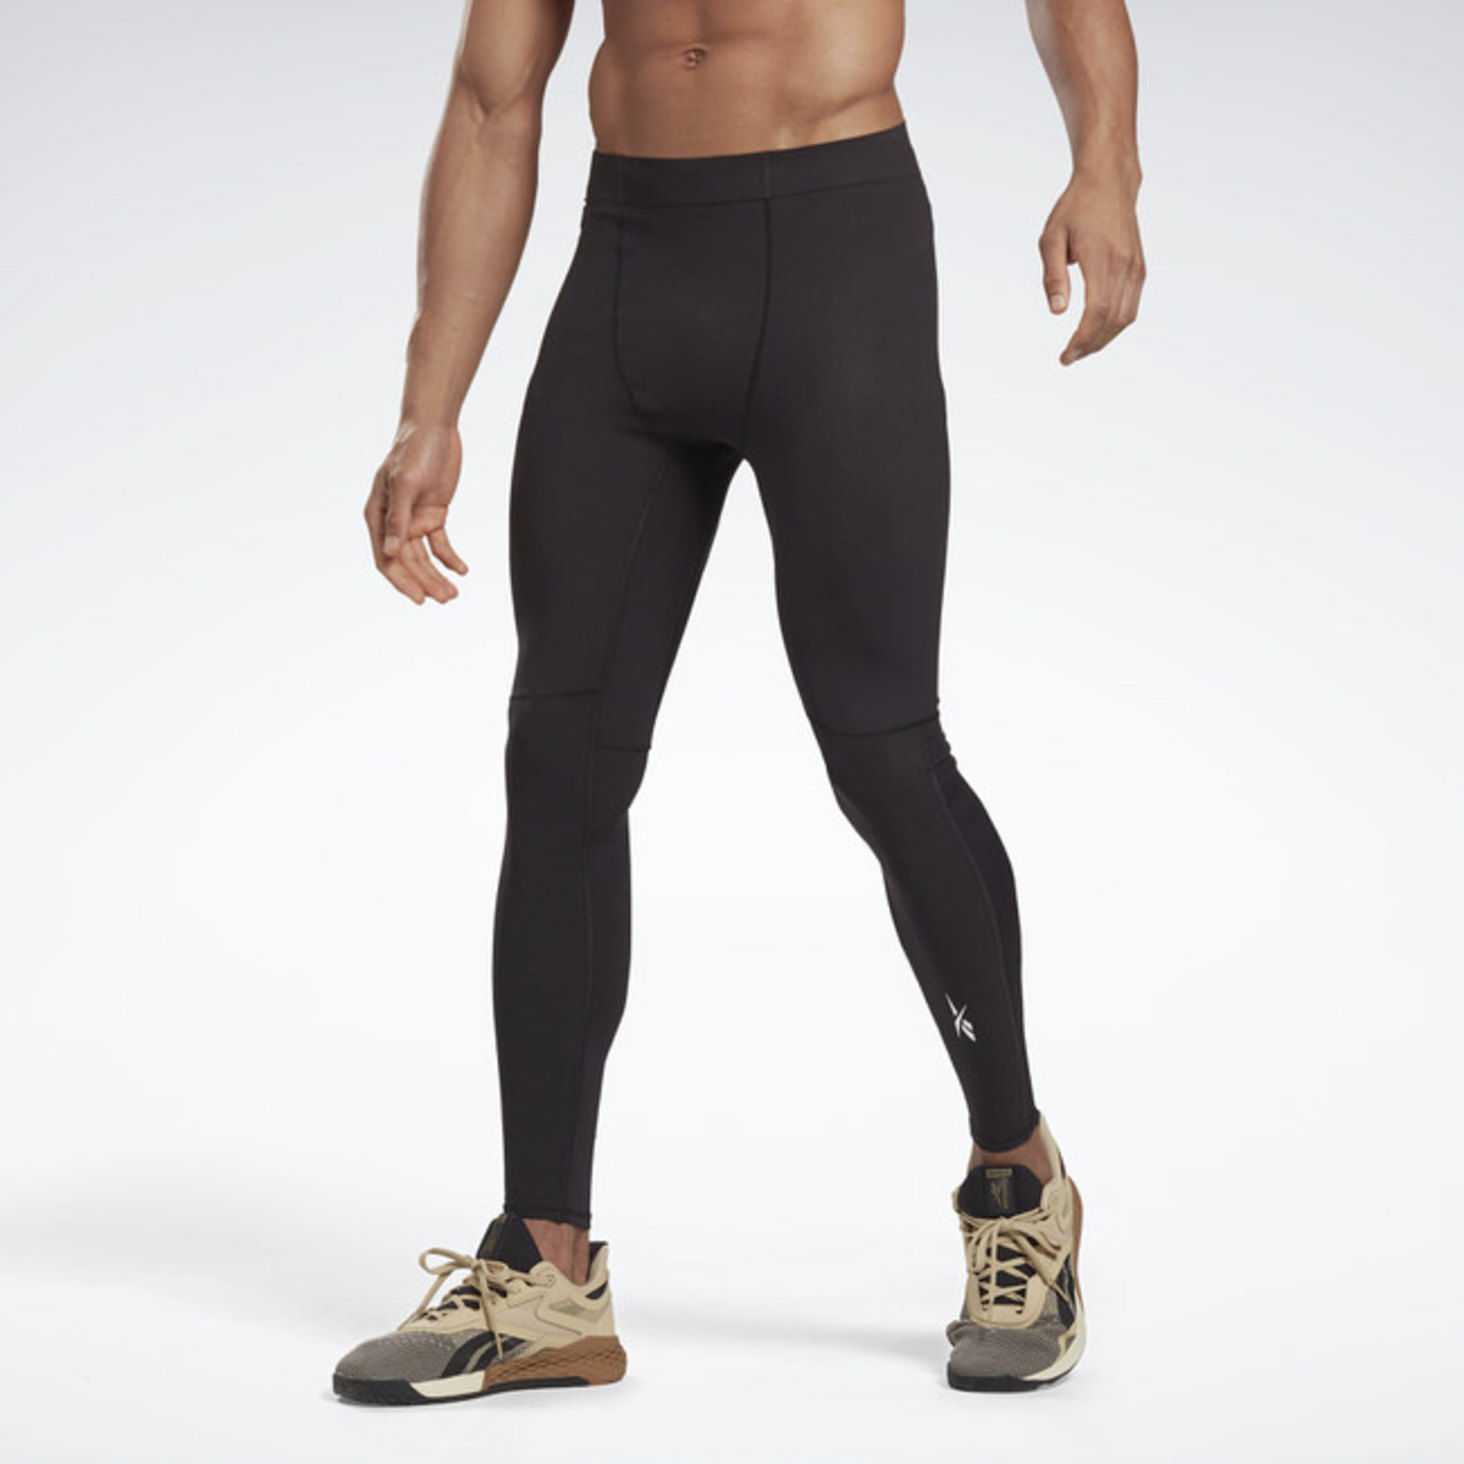 United By Fitness Compression Tights